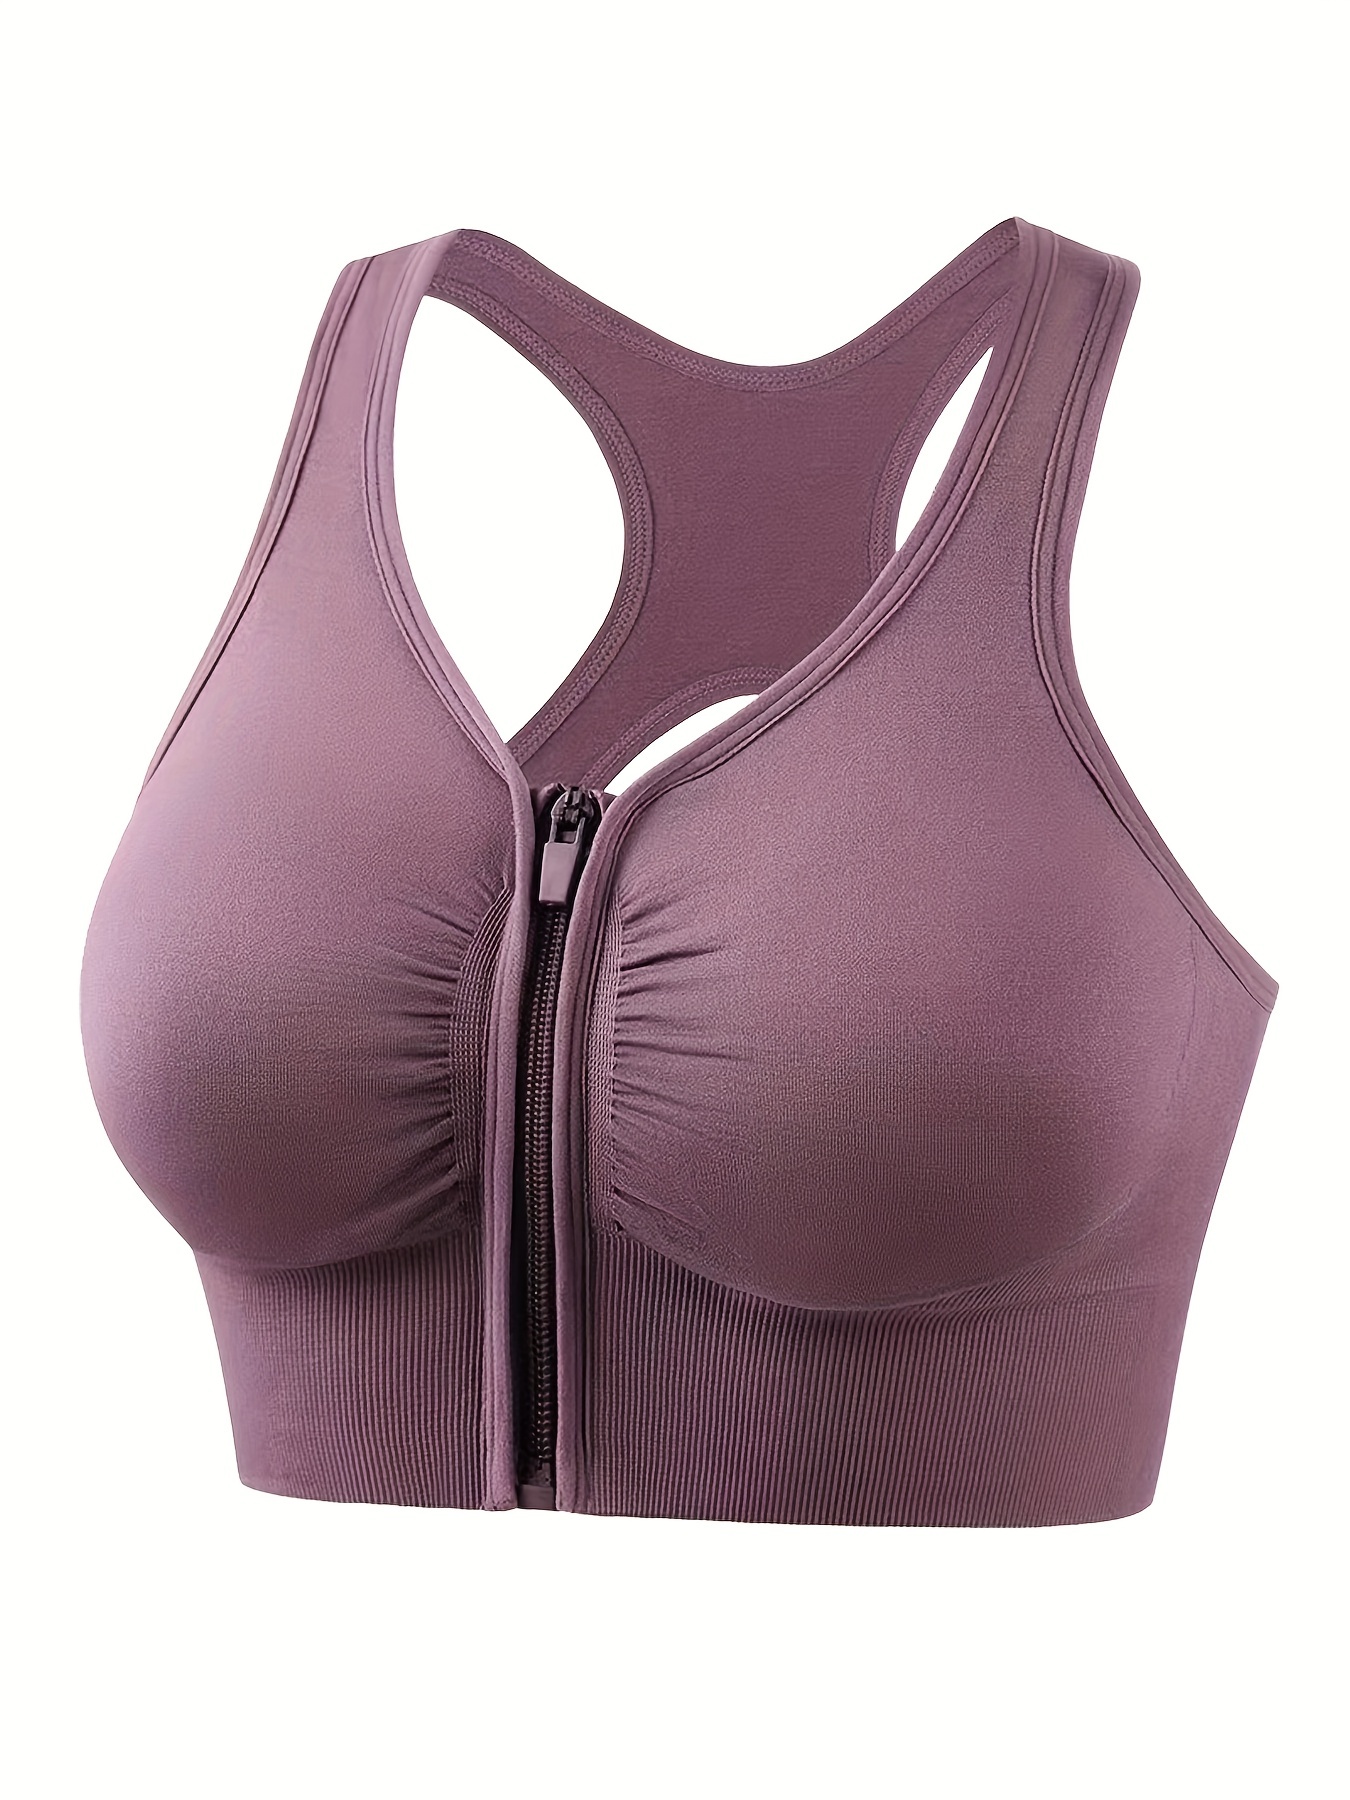 Zip Front Sports Bras for Women, No Rims Padded Yoga Crop Tank, Racerback  Support Top, Fitness Workout Running, 2 Pcs (Color : Purple, Size : Small)